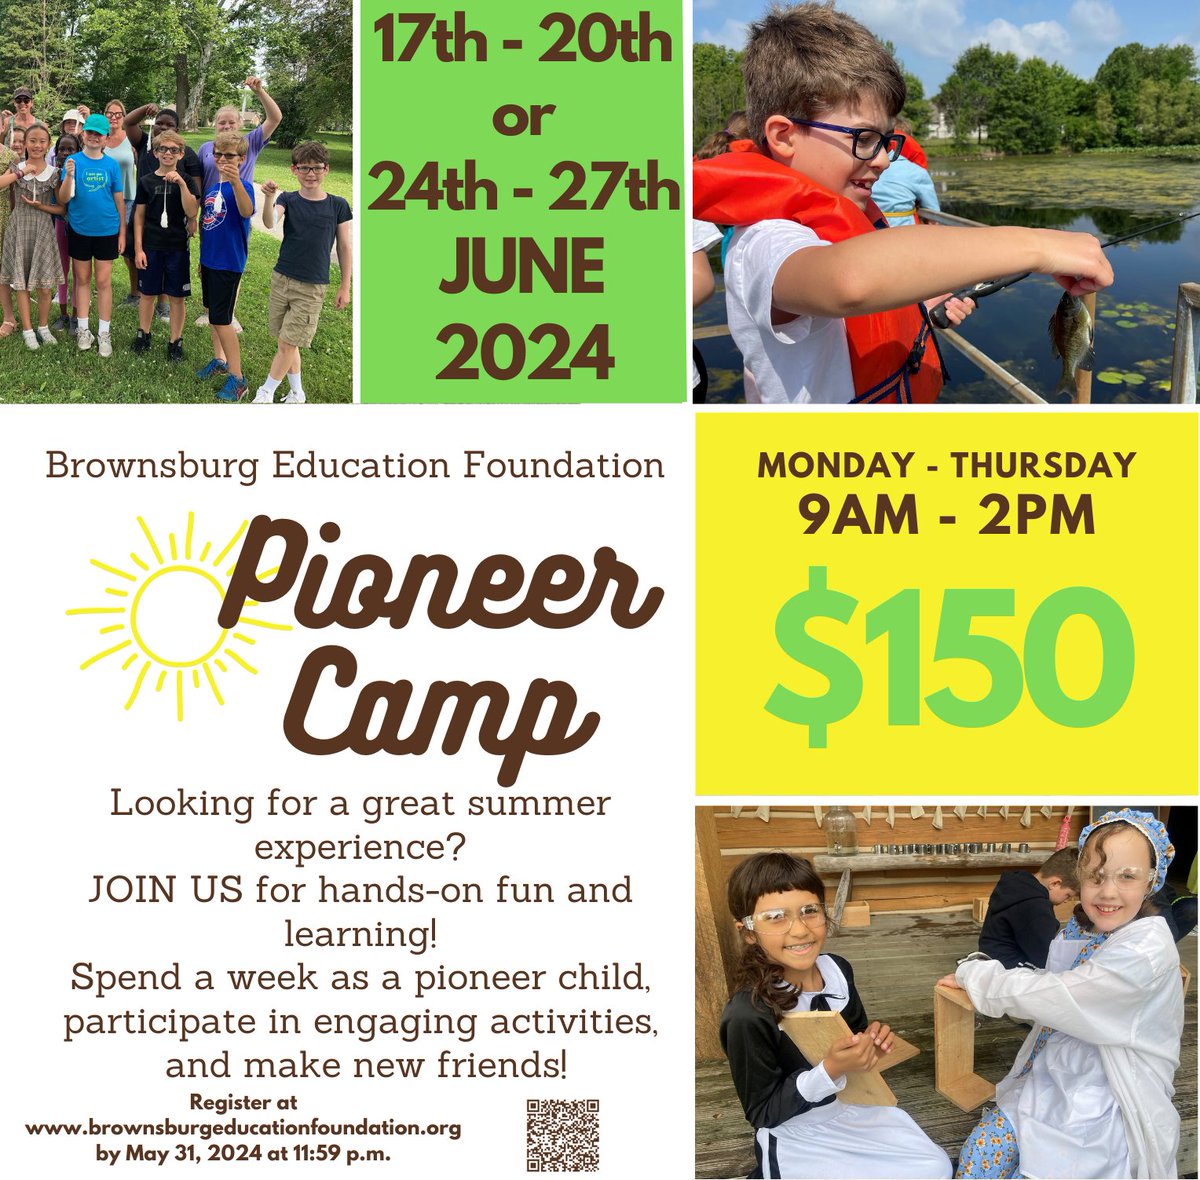 Registration CLOSES at the end of the month for BEF Pioneer Camp! Don't miss this SUPER FUN experience open to exiting 3rd, 4th and 5th grade students! Learn more or register here: bit.ly/38swReb